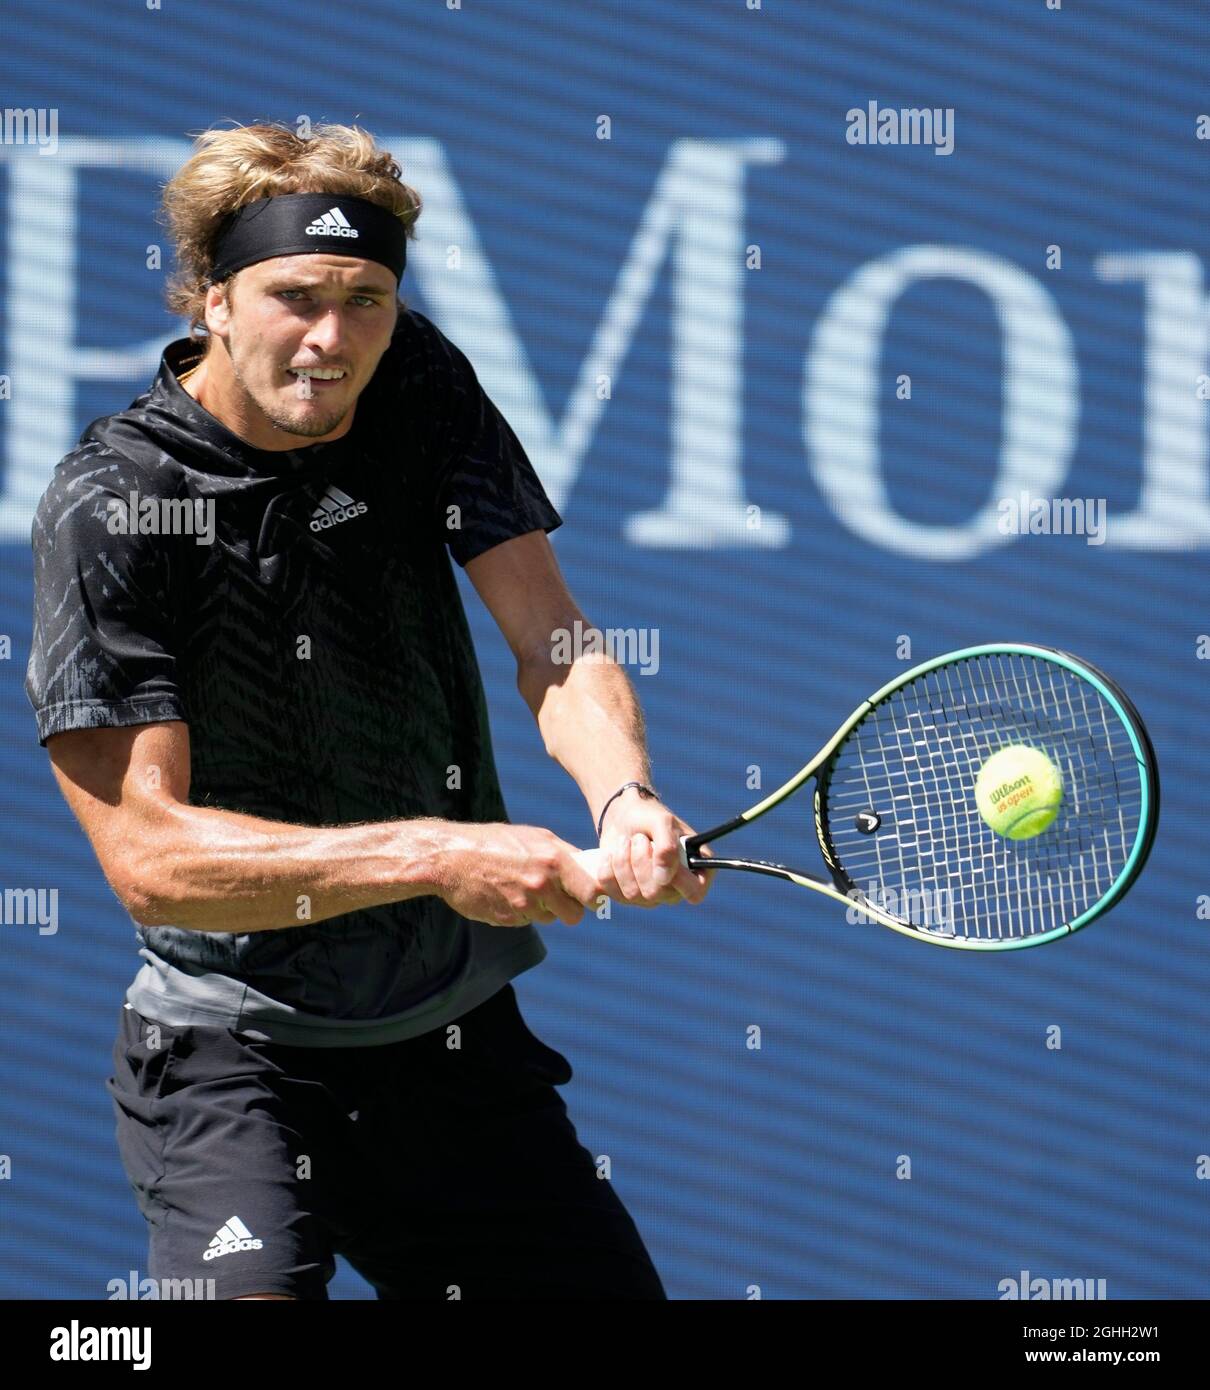 September 6, 2021 Jannik Sinner (ITA) loses to Alexander Zverev (GER), 6-4, 6-4, 7-6 at the US Open being played at Billy Jean King Ntional Tennis Center in Flushing, Queens, New York, 